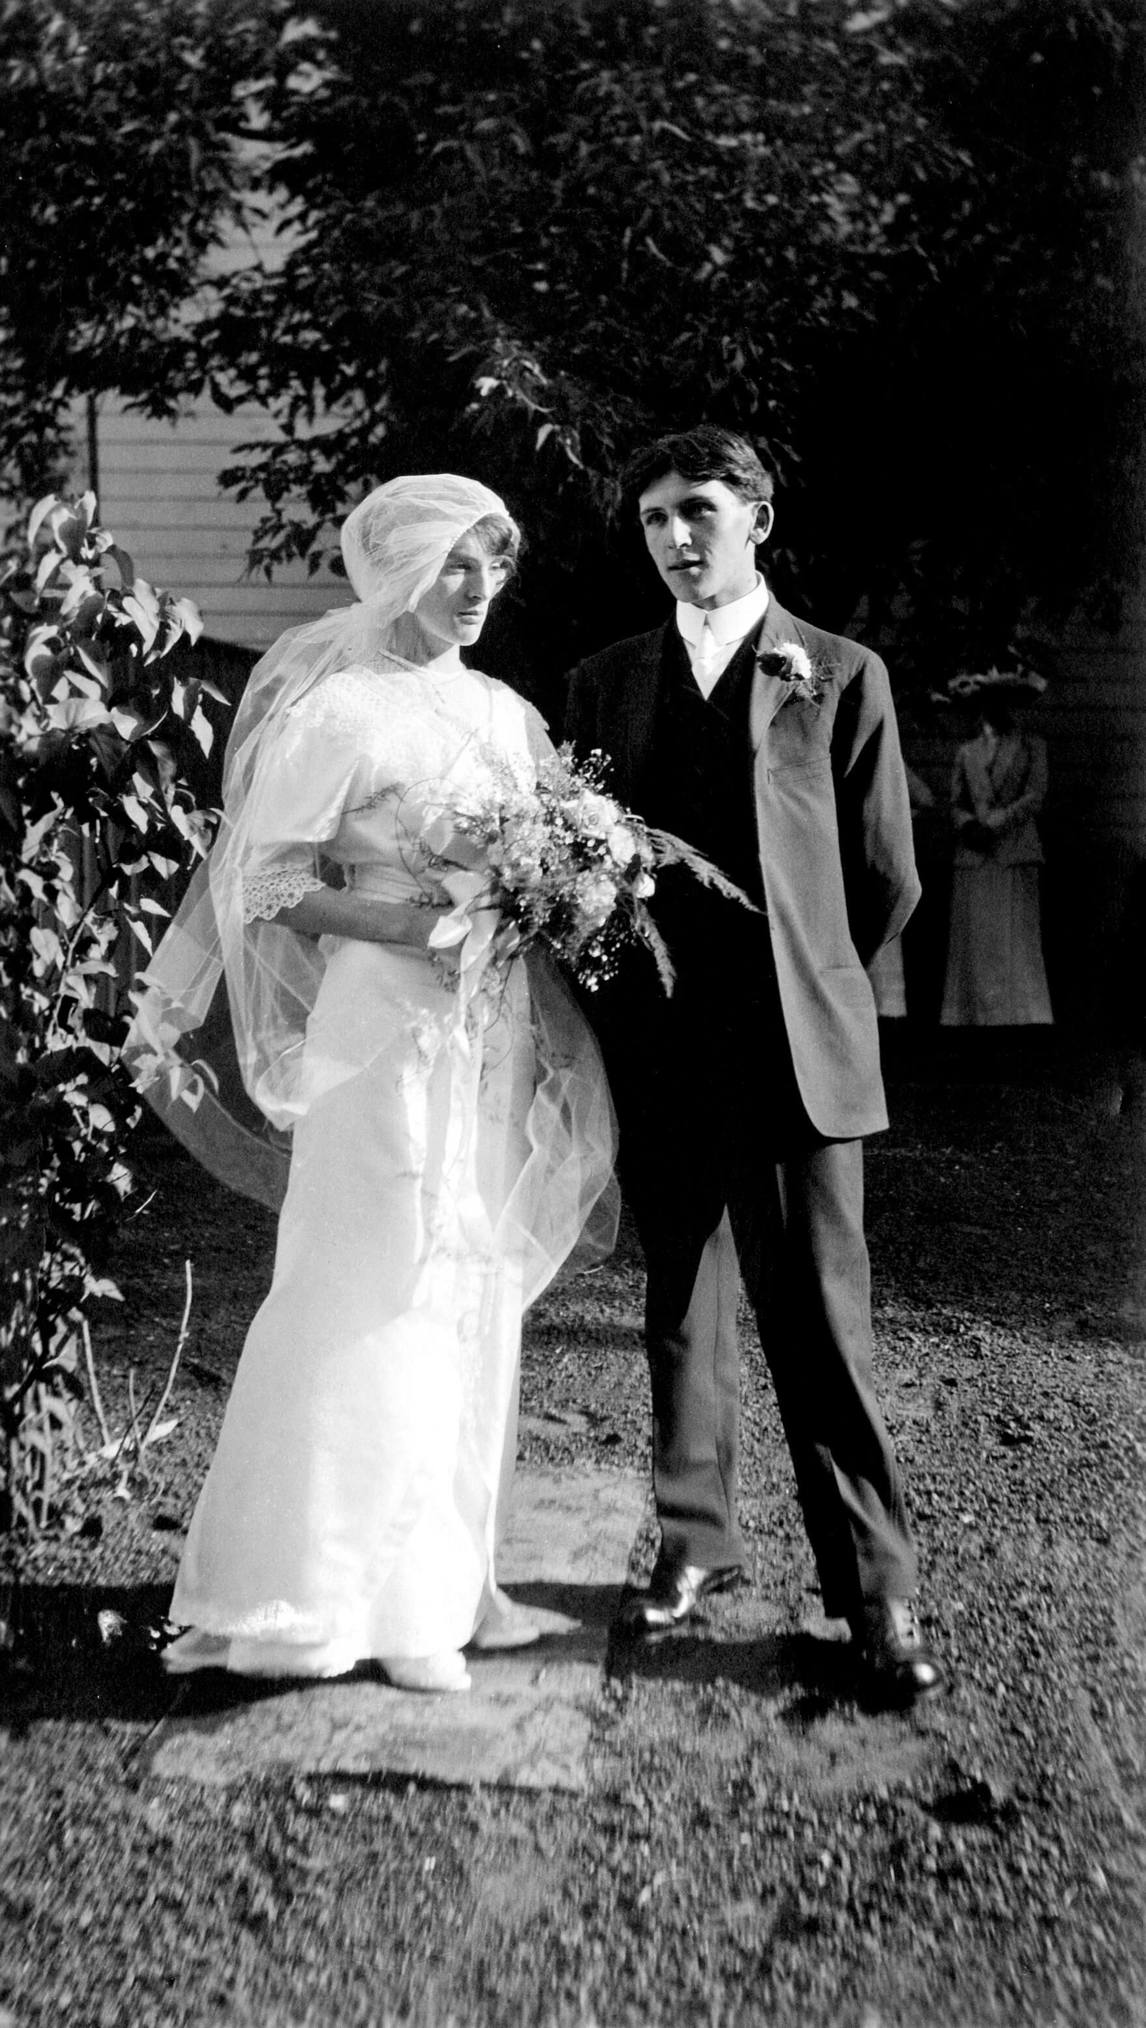 Photograph of Rill Porter and Bertram Brooker on their wedding day, July 3, 1913.